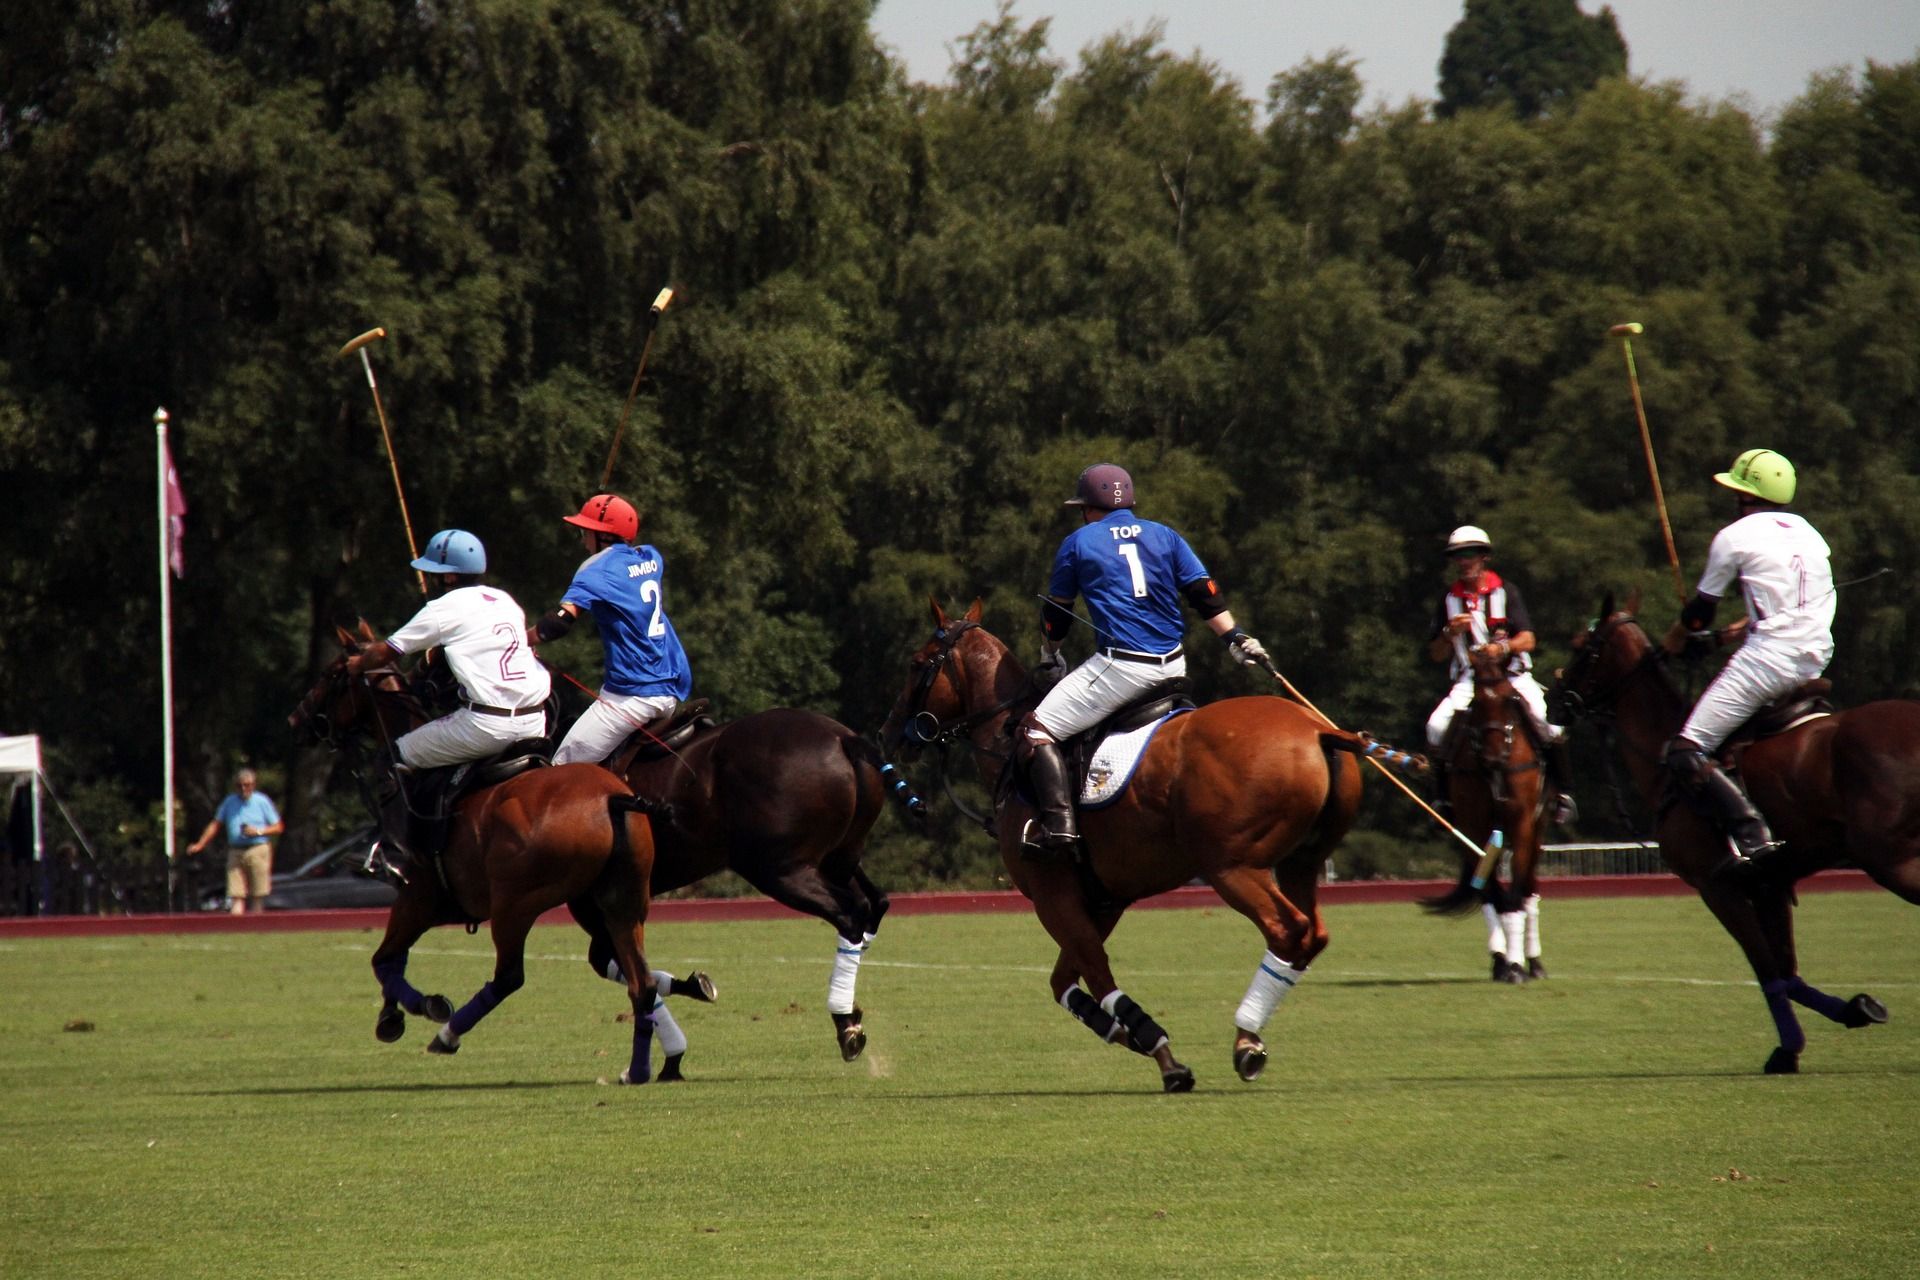 equestrians playing a game of polo on the field